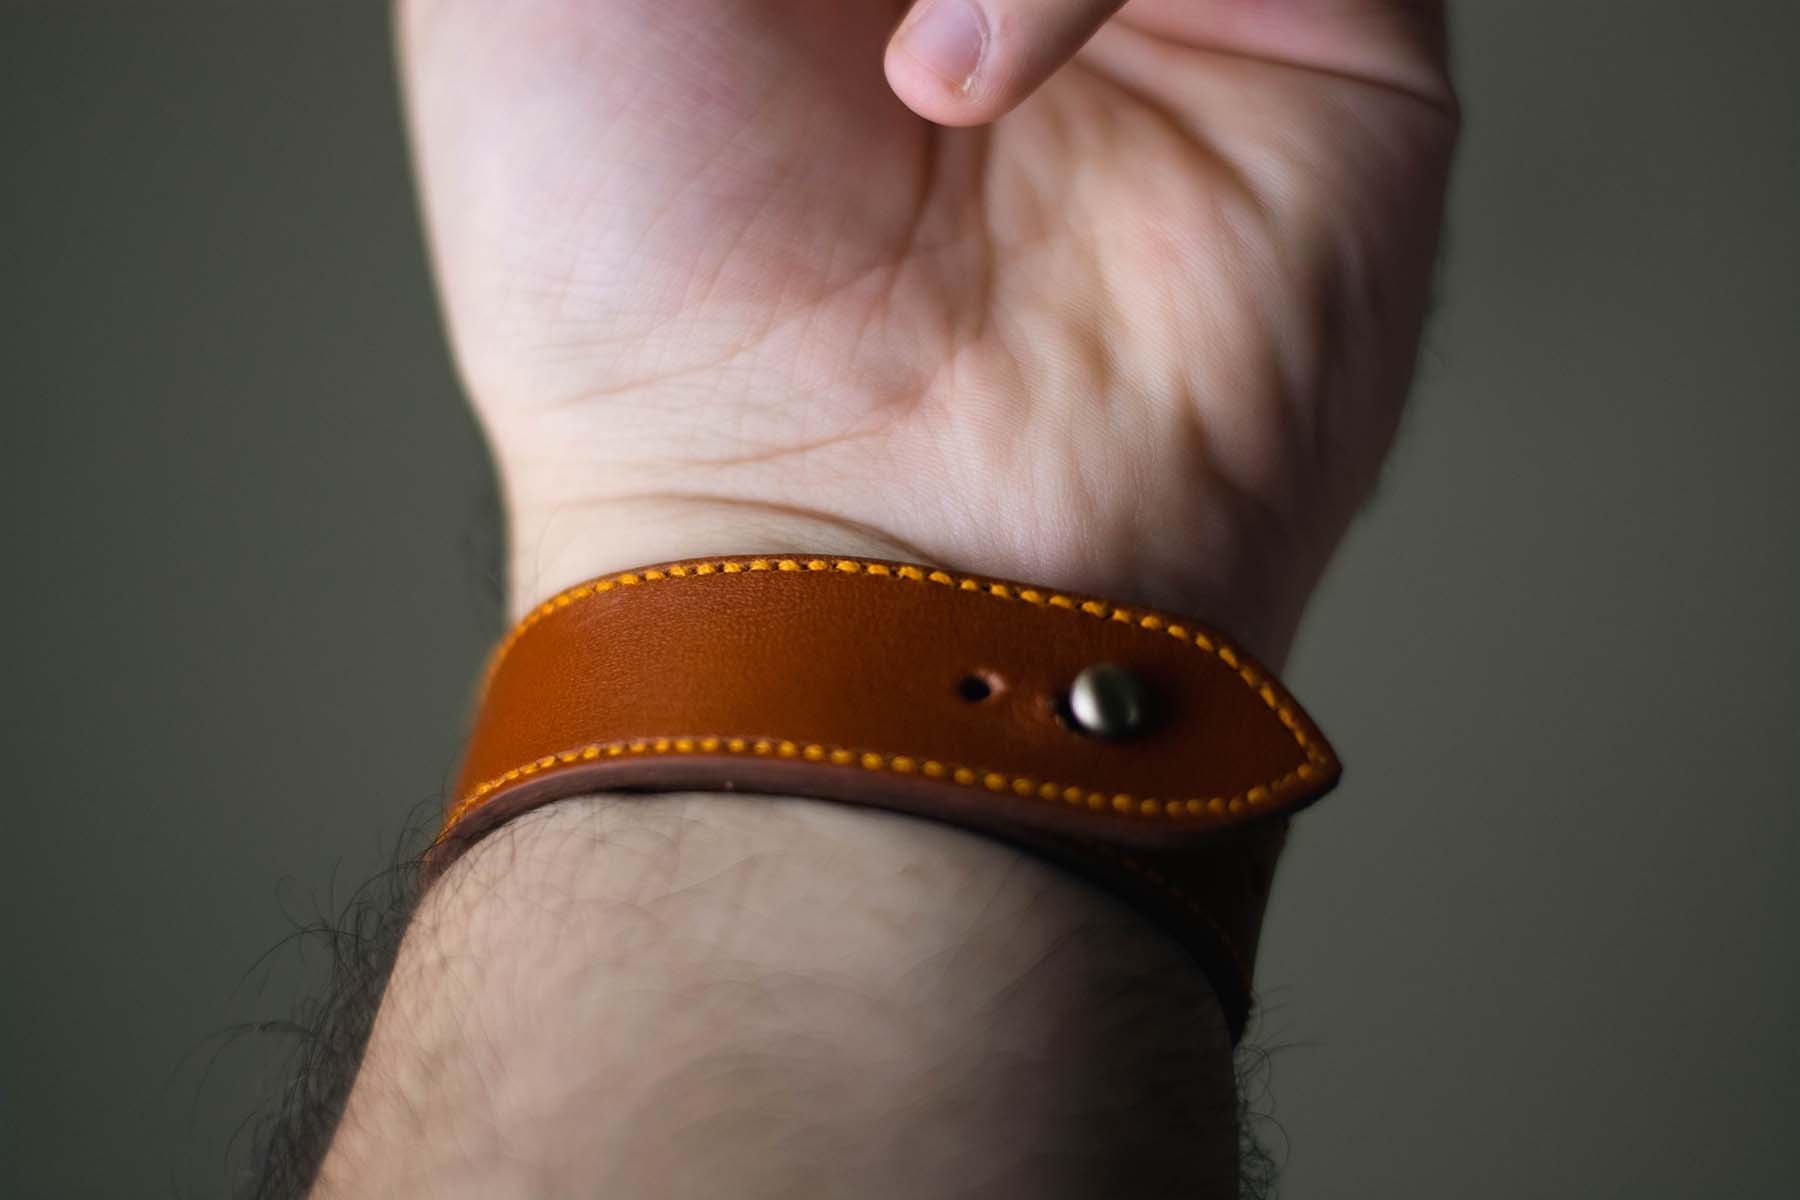 Tanned Apple Watch Strap - Pure Leather Strap